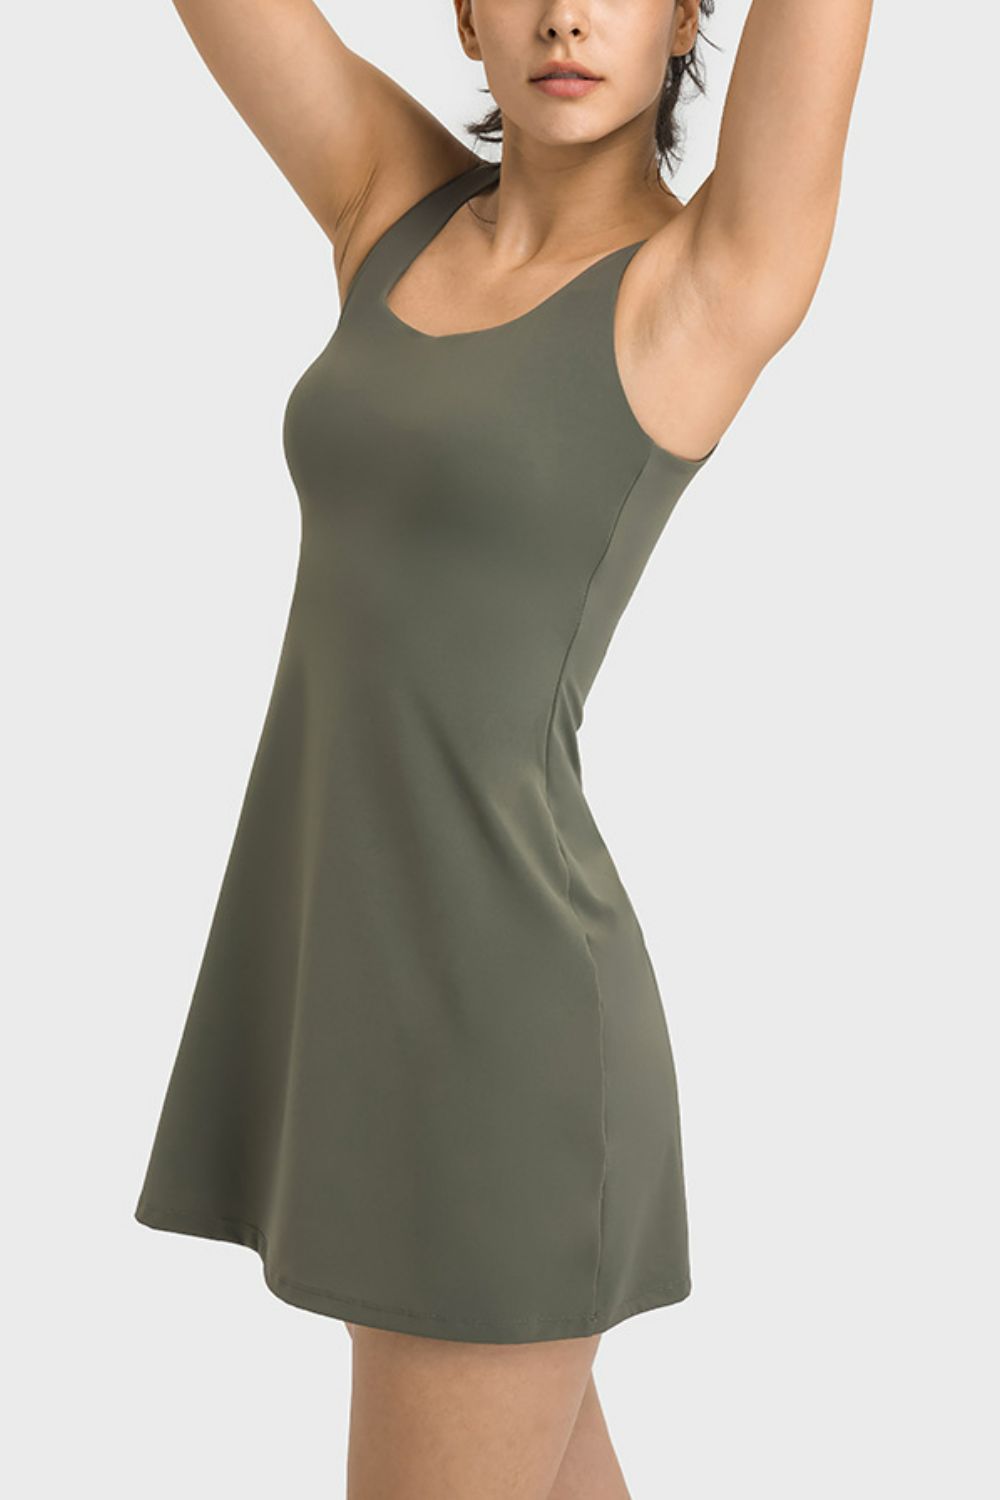 Side View, Square Neck Sports Tank Dress with Full Coverage Bottoms In Sage